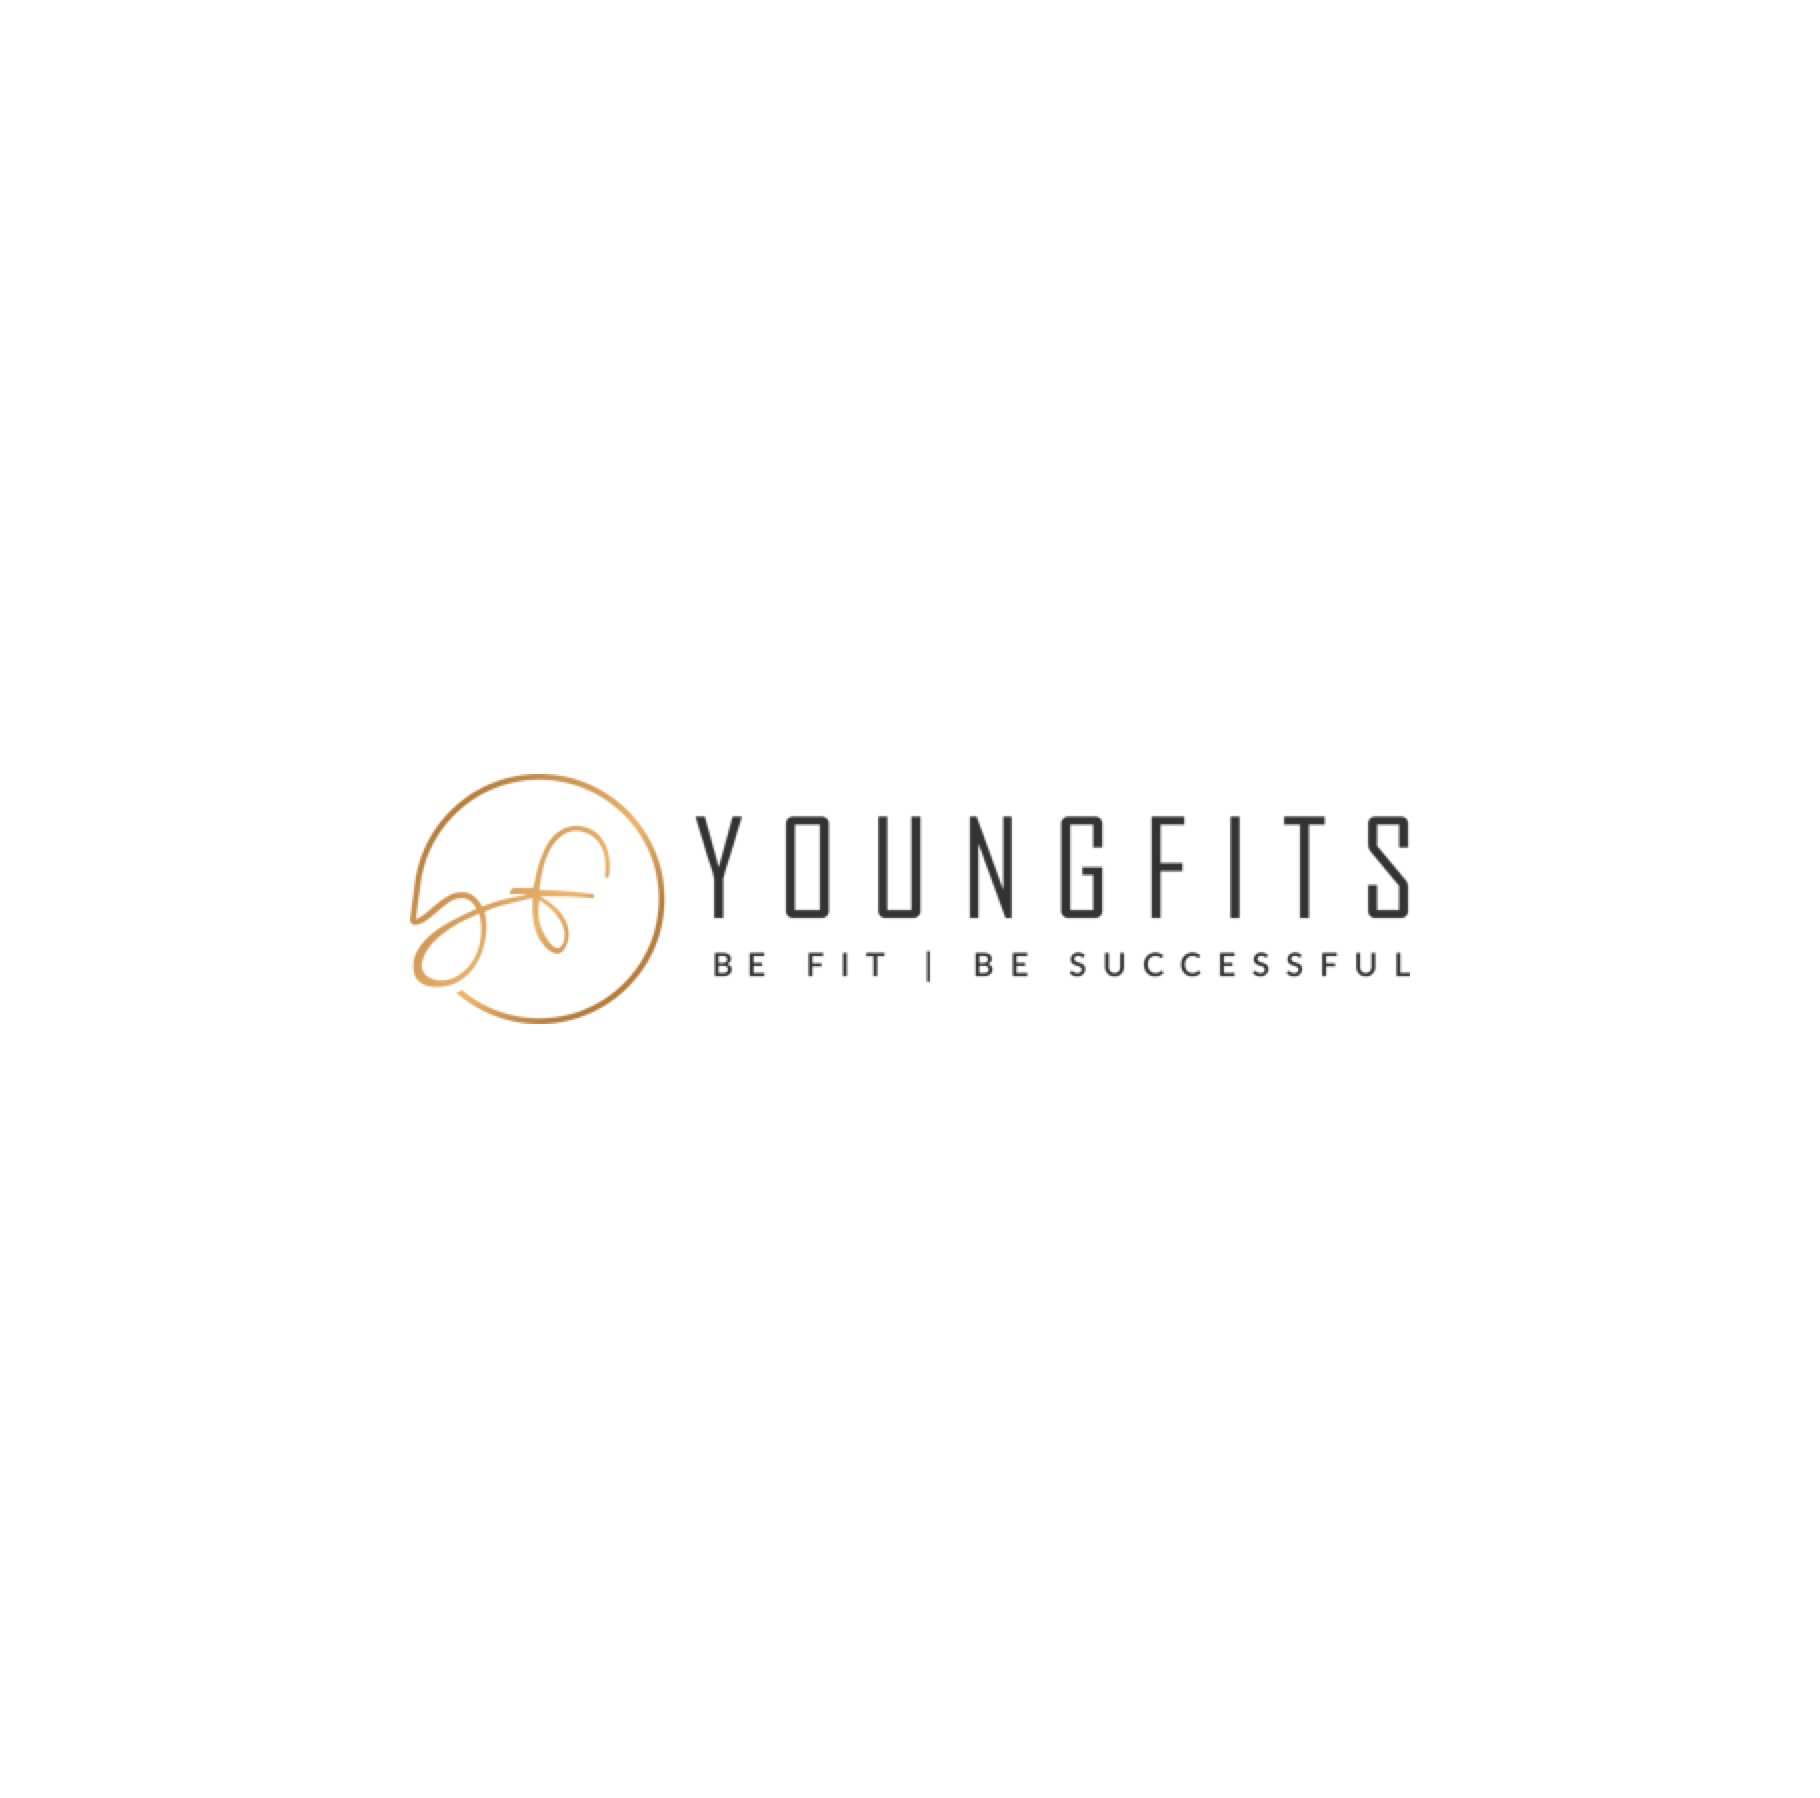 YOUNGFITS: BE FIT | BE ZOCCESSFUL